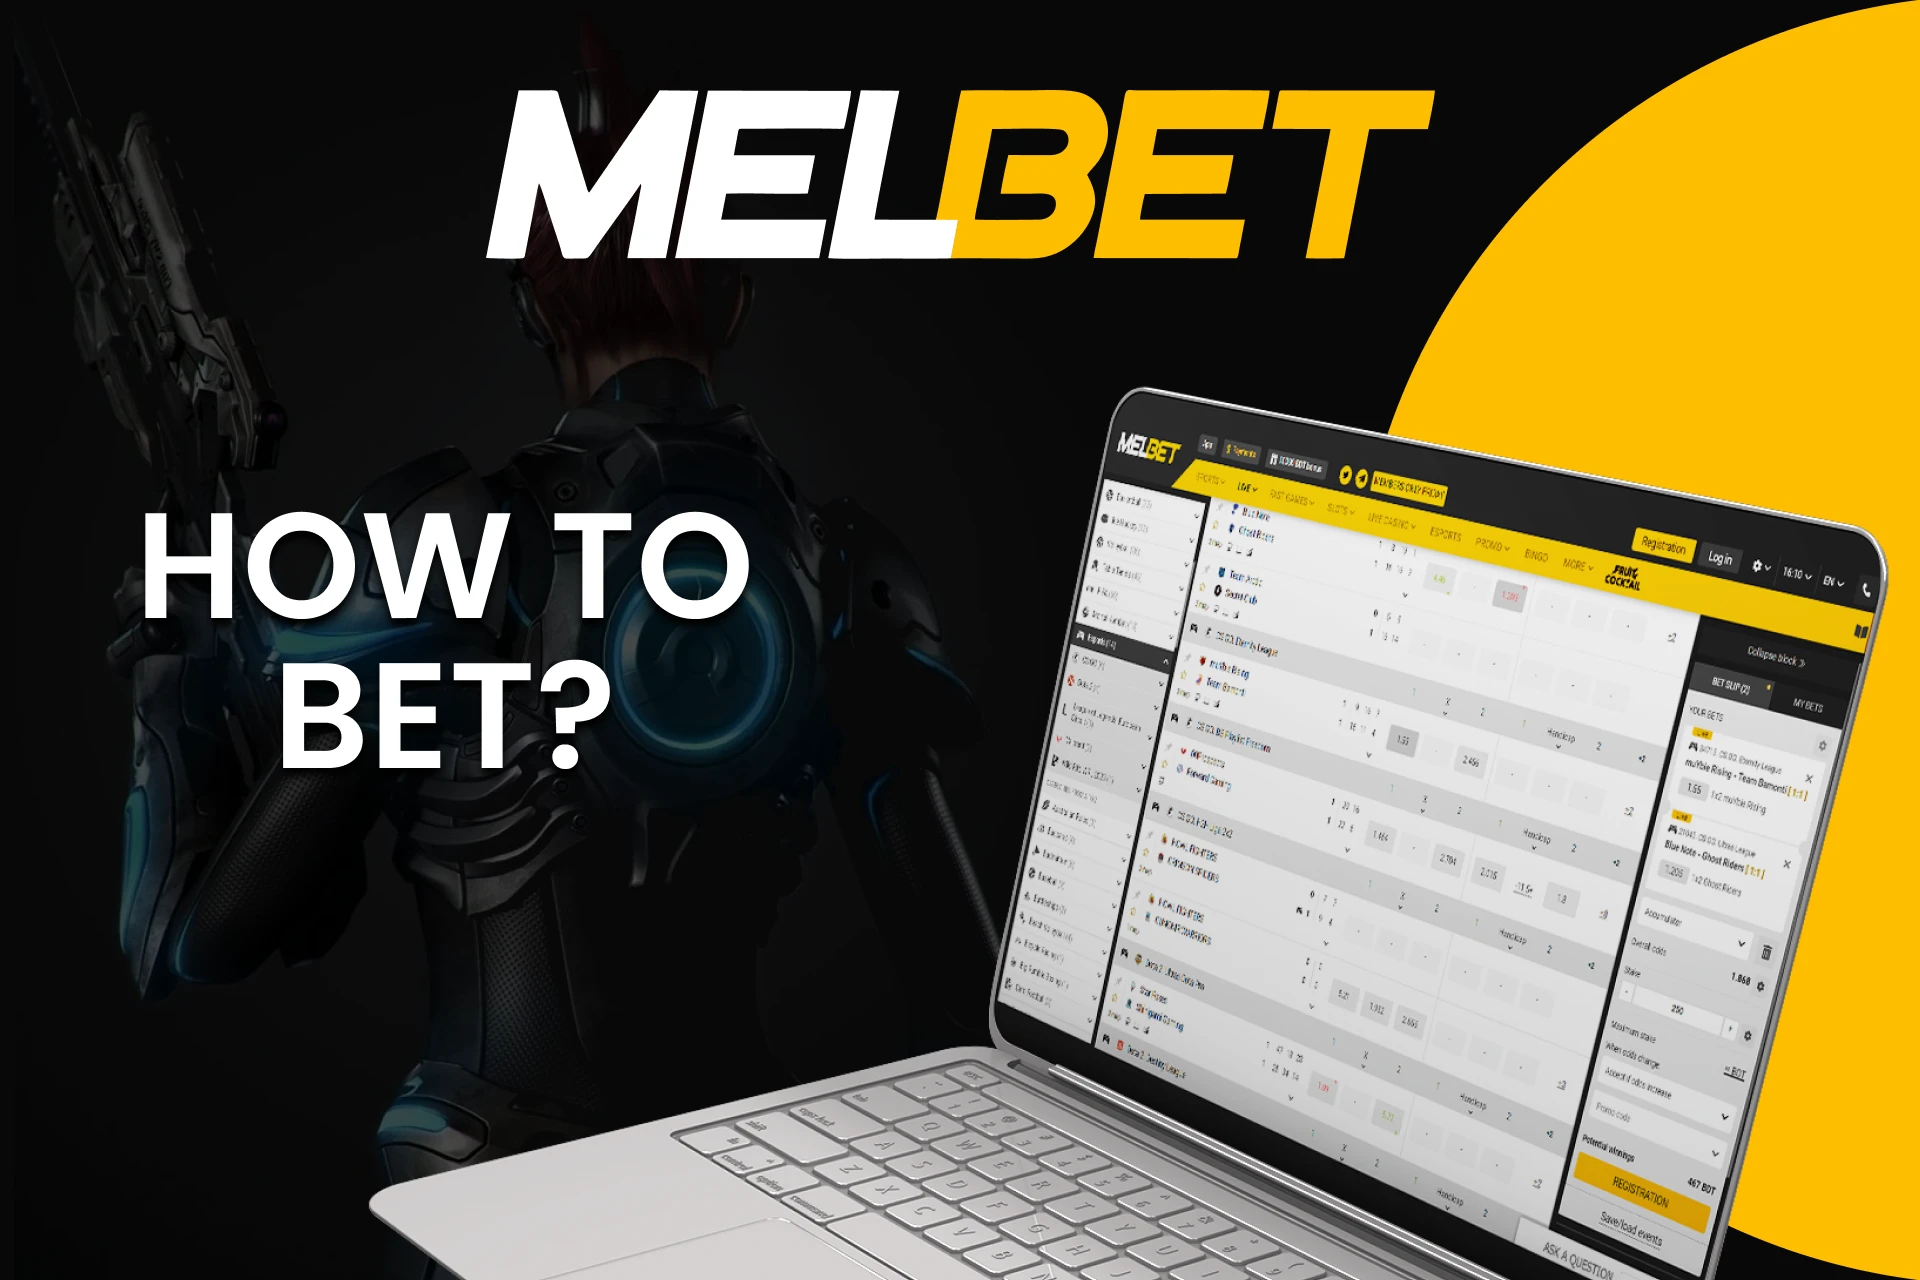 Go to the esports section on Melbet to bet.